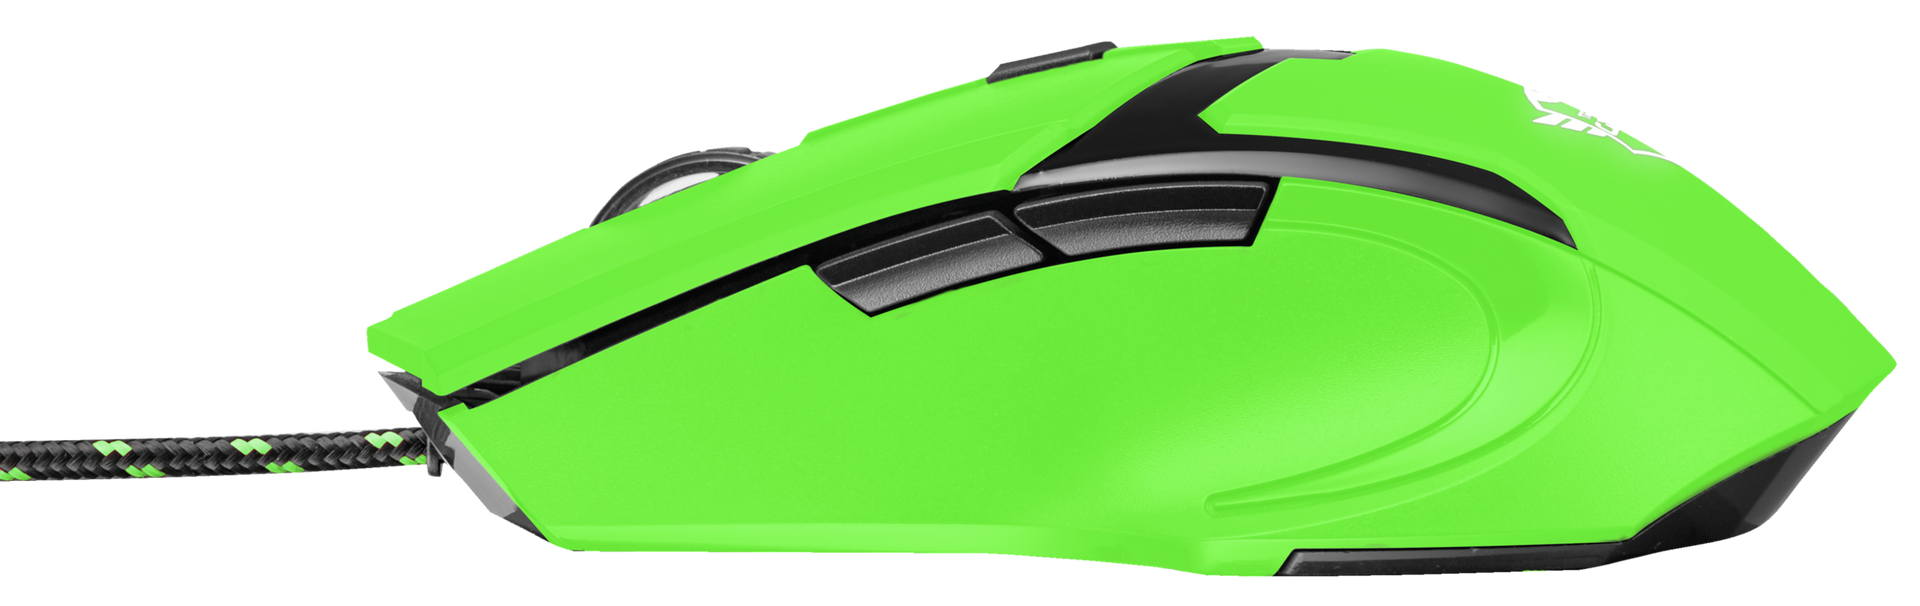 GXT 101-SG Spectra Gaming Mouse - green-Side